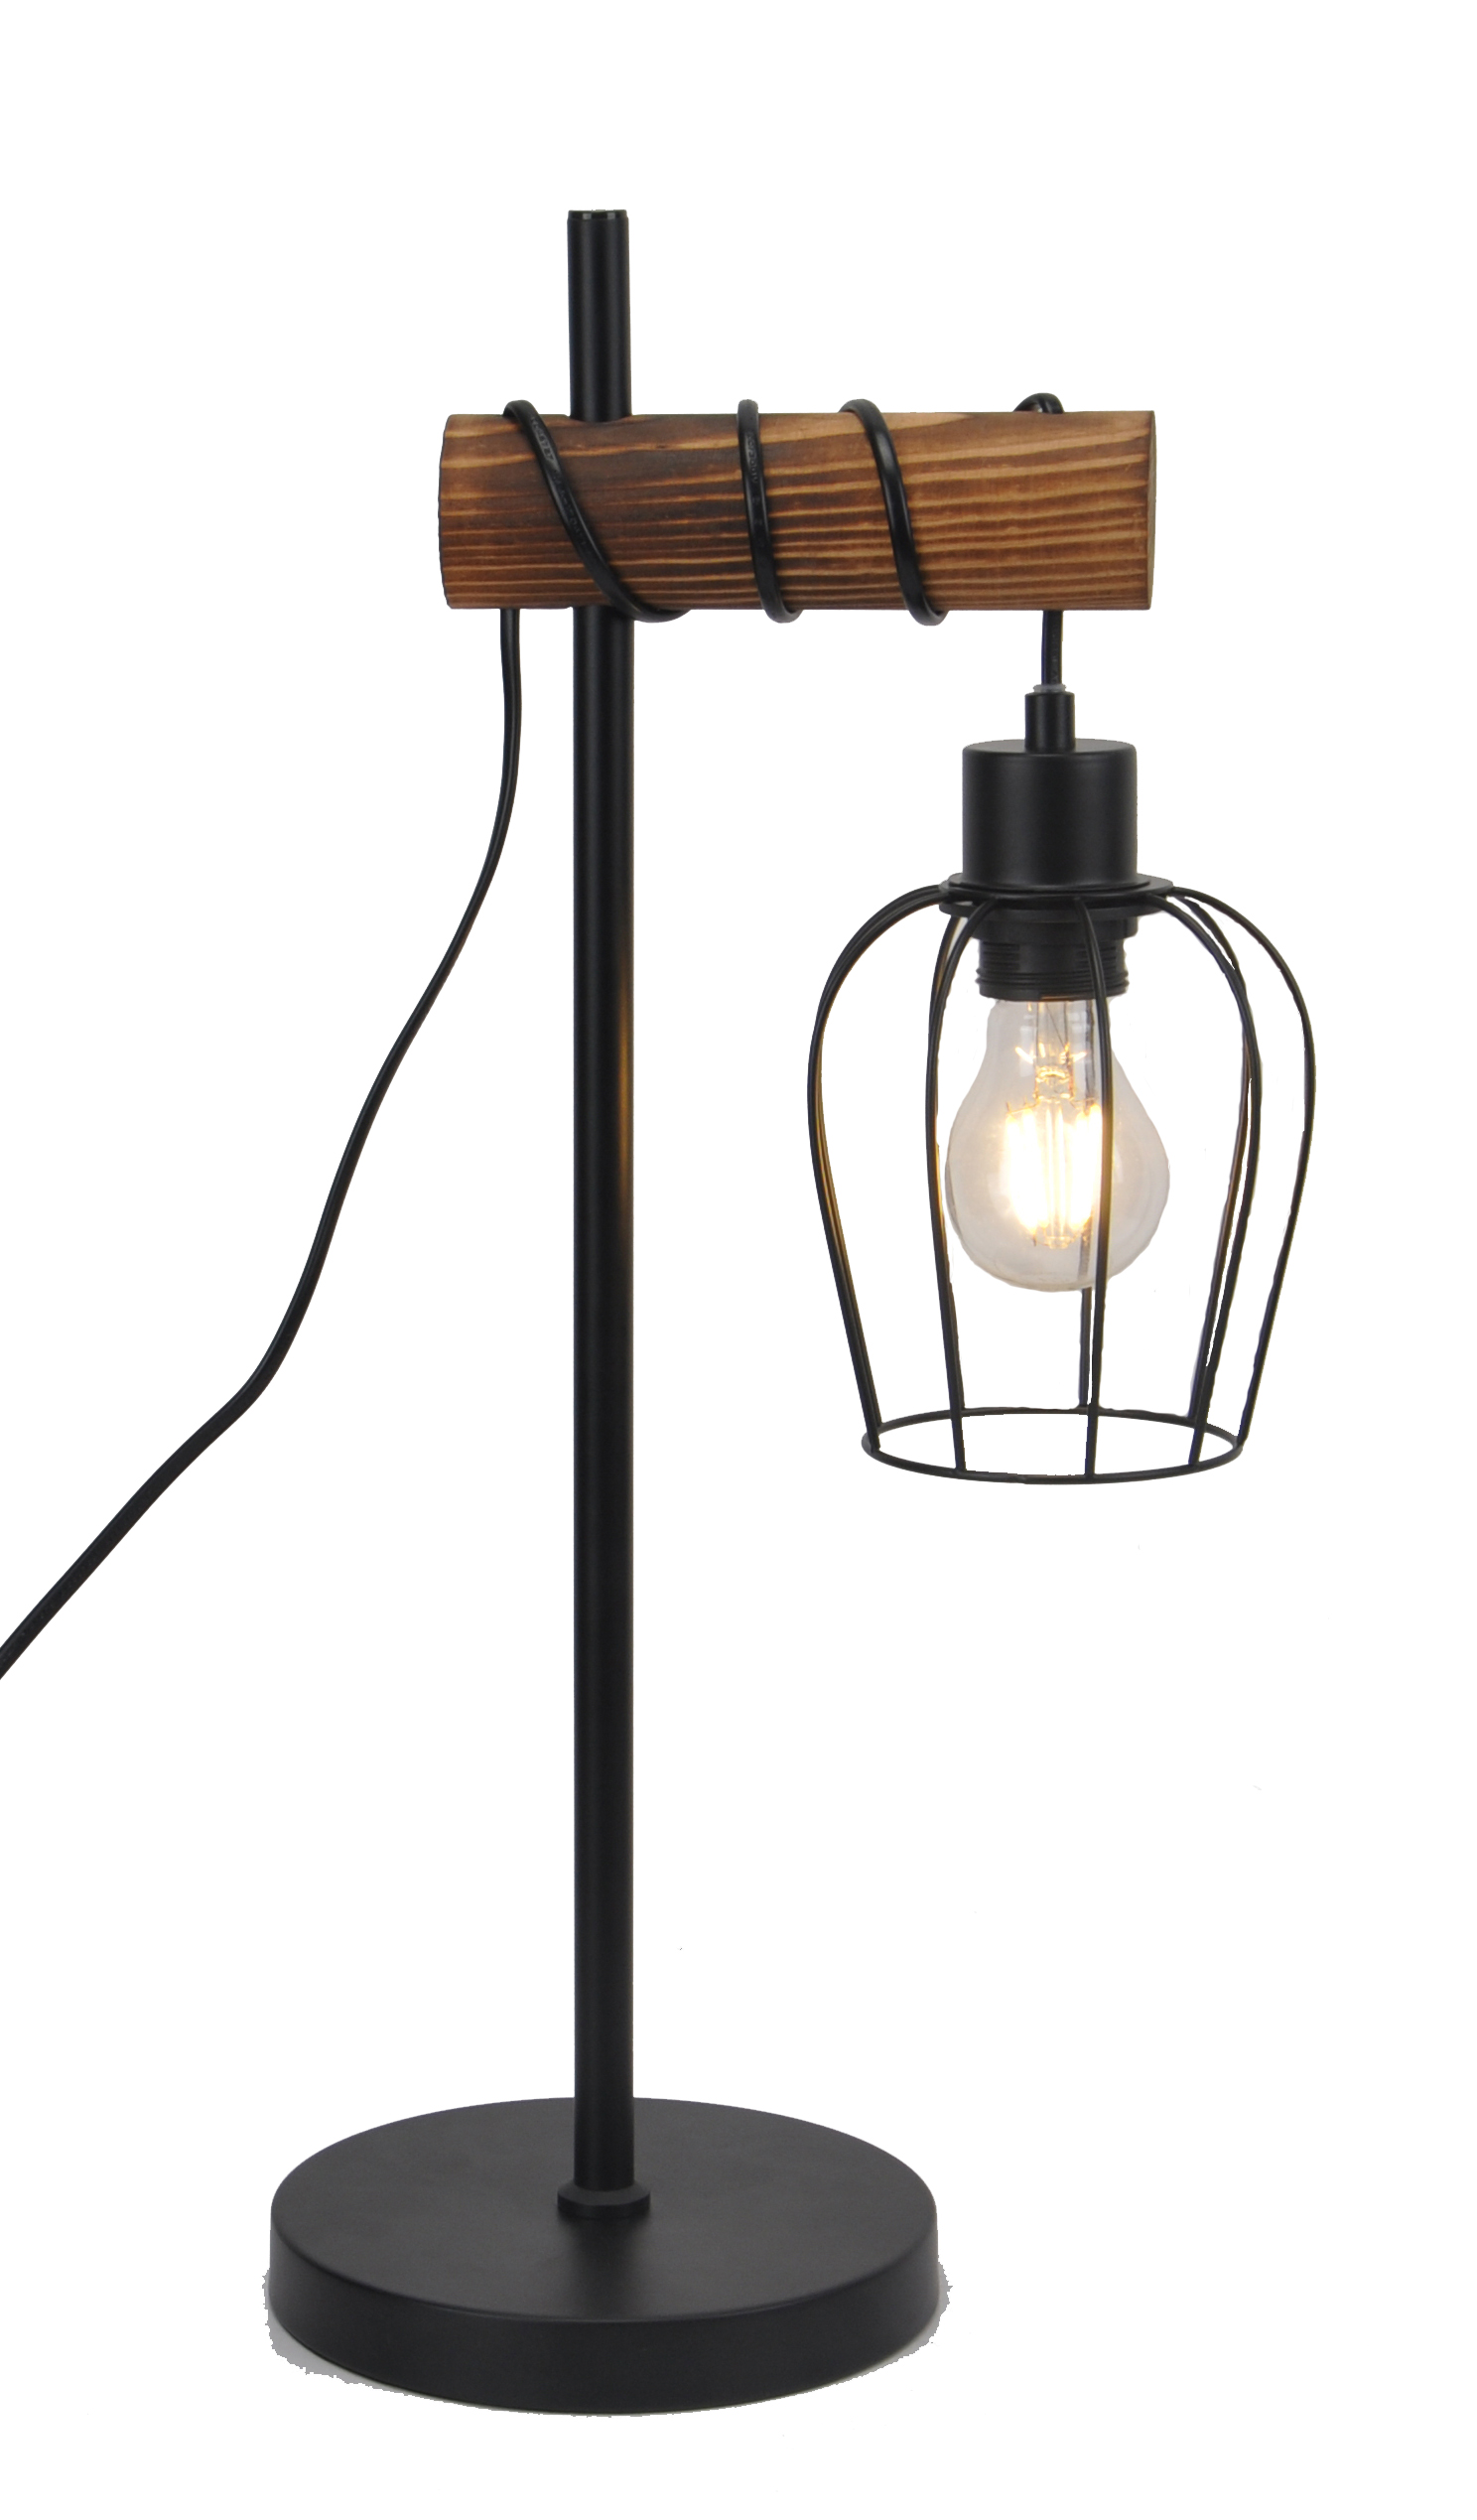 Metal table light with wood pole